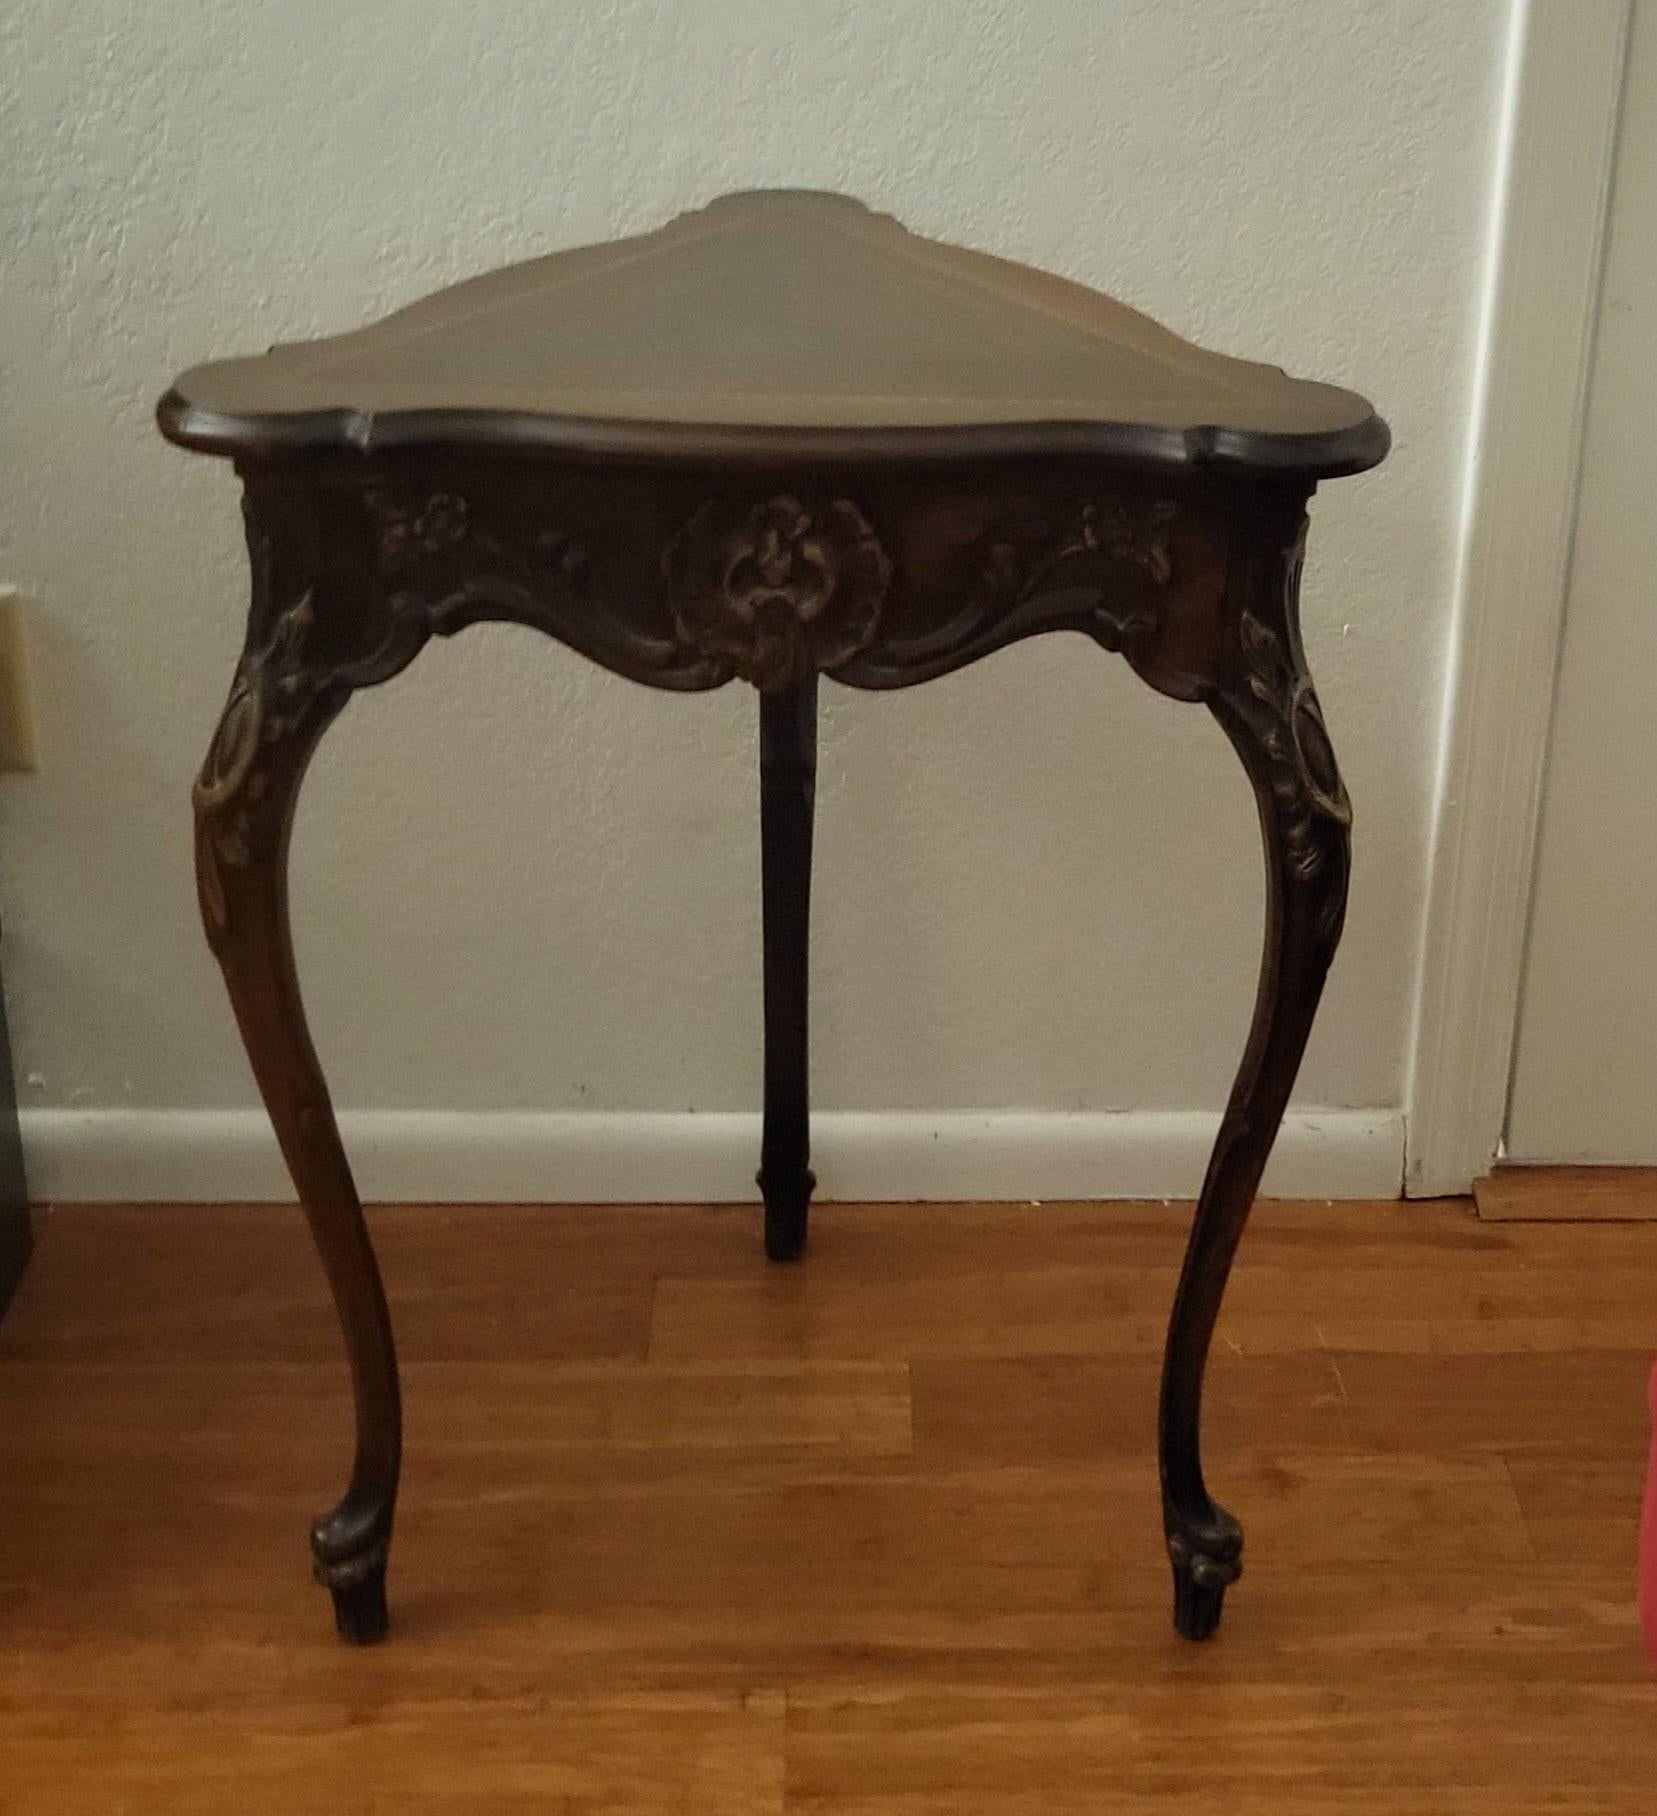 Antique style solid wood side table in a dark walnut finish and triangular shape. Made in 2011. This table has a polished top and three elegant hand-carved legs. The table is sturdy and in a very good condition. This table will make a great addition